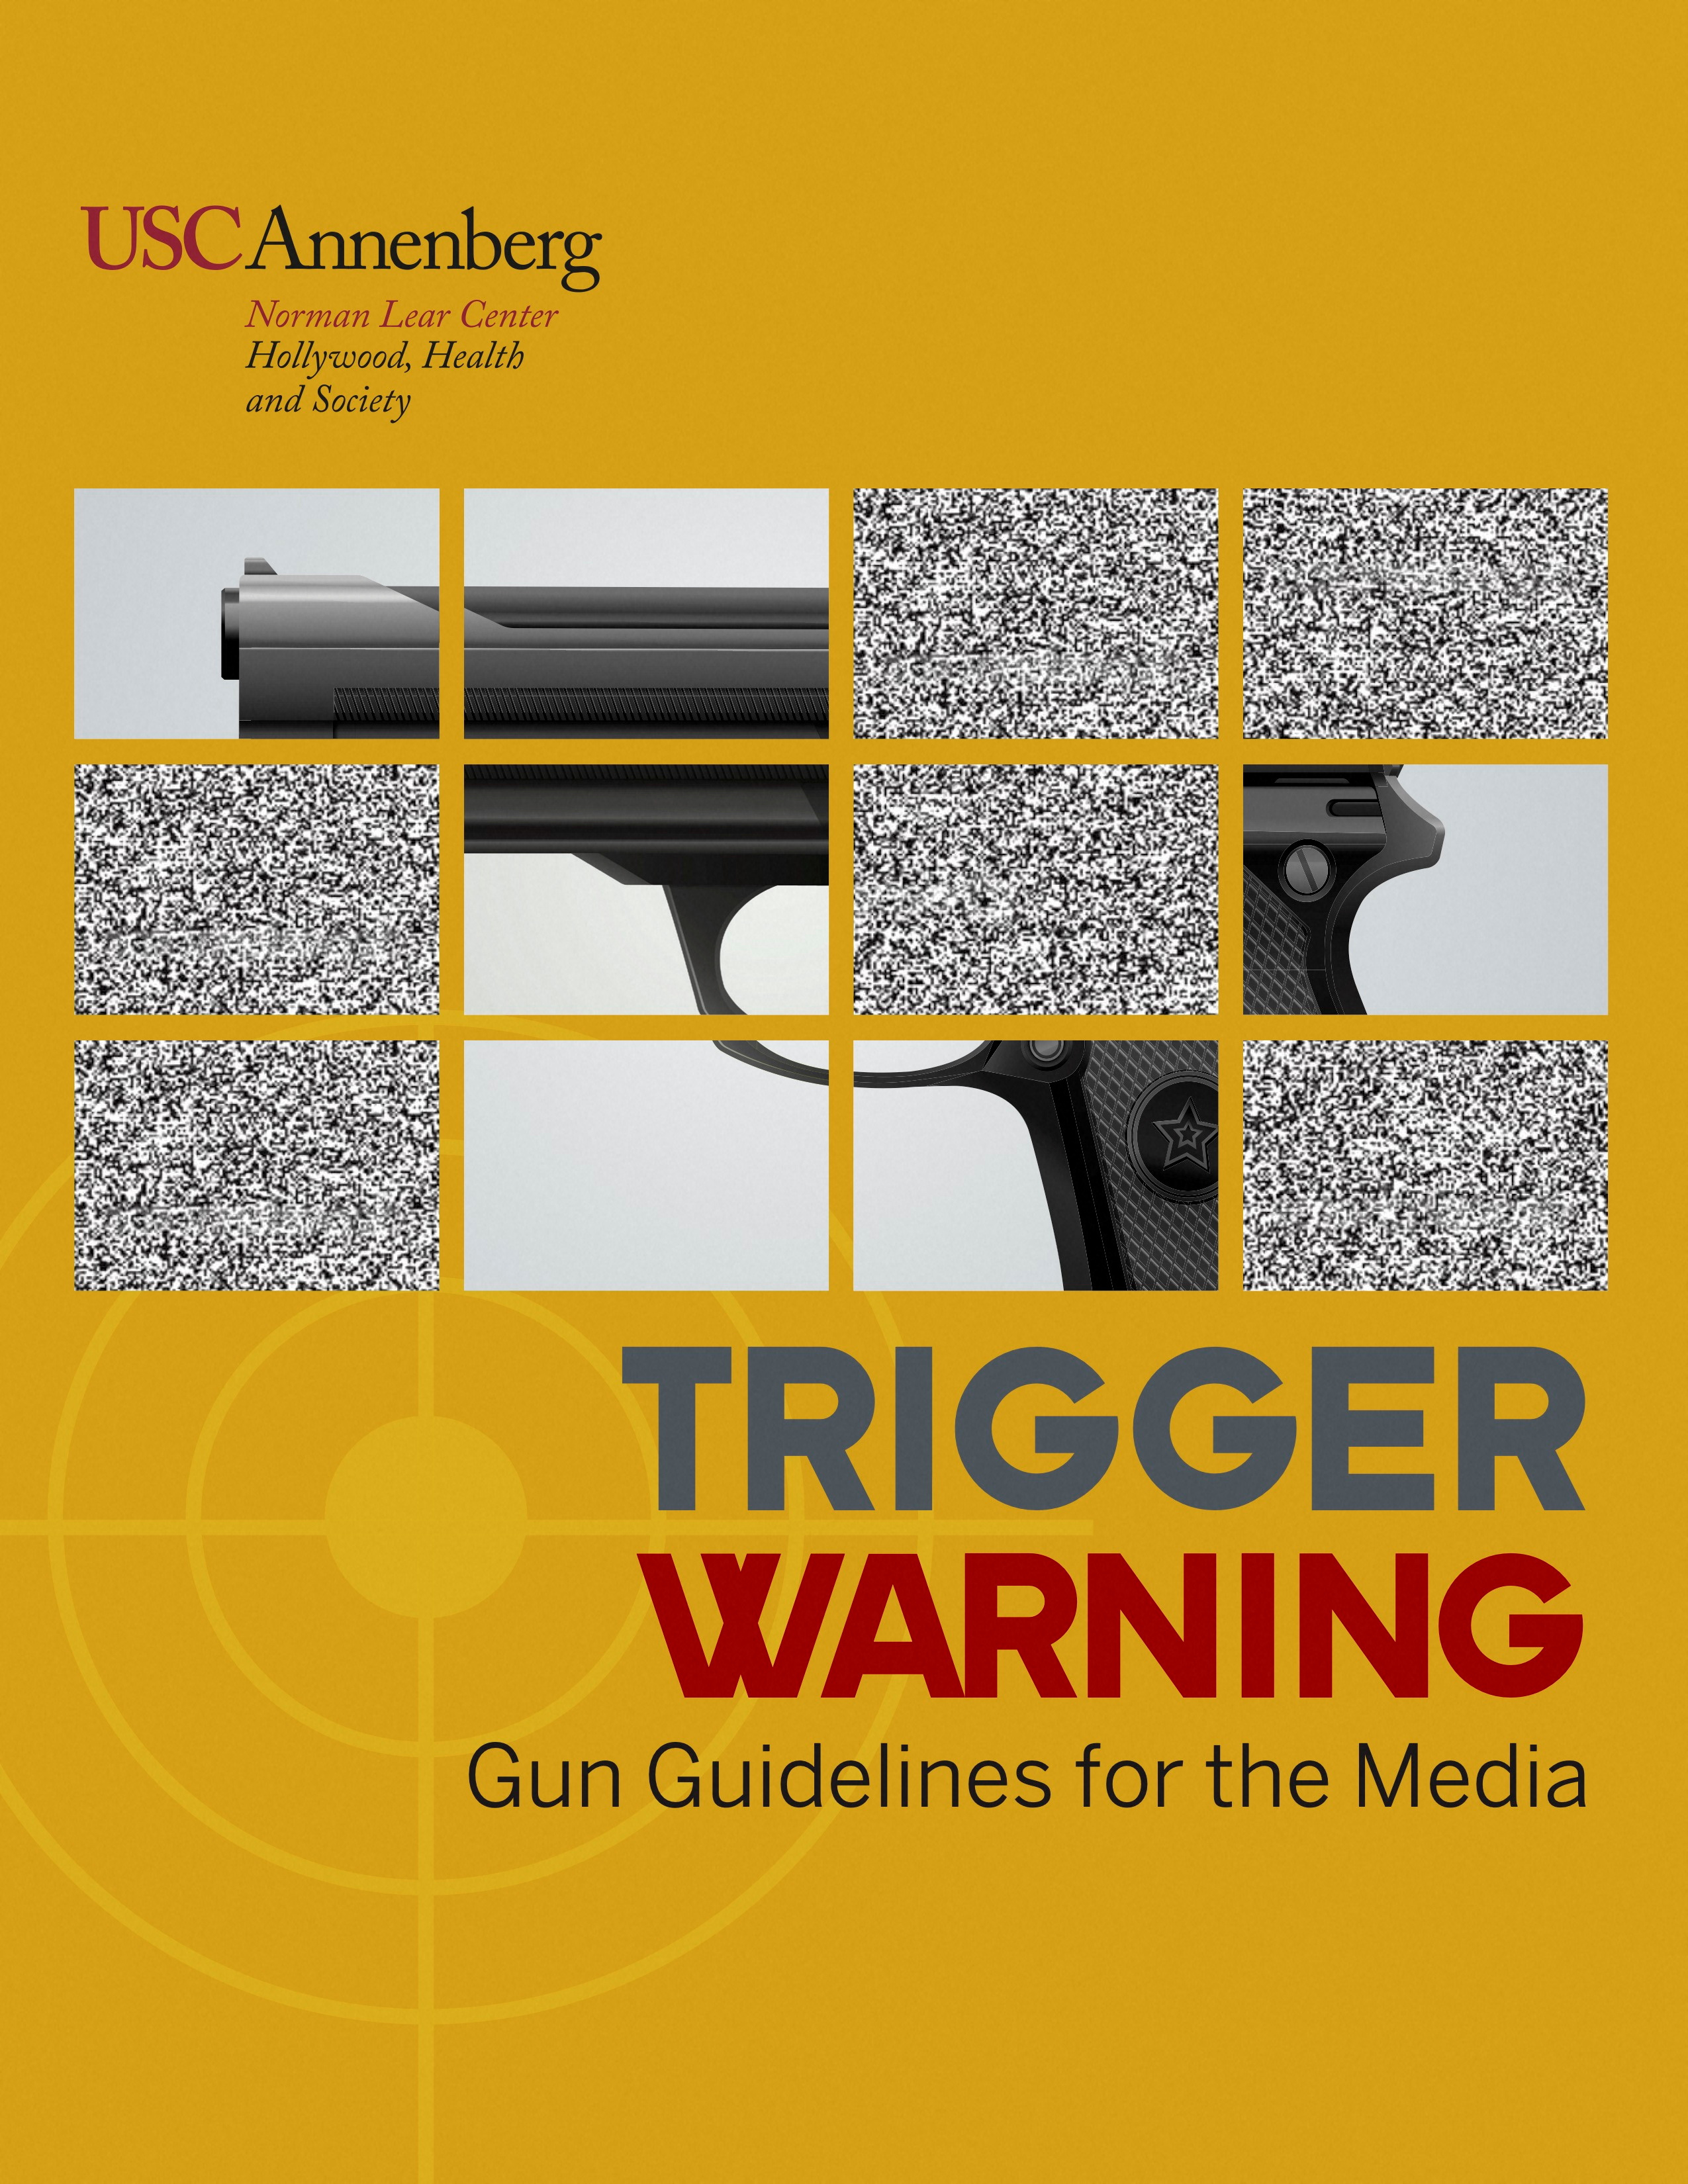 A view of the title page of a gun guide published by USC Annenberg's Norman Lear Center in this undated handout image